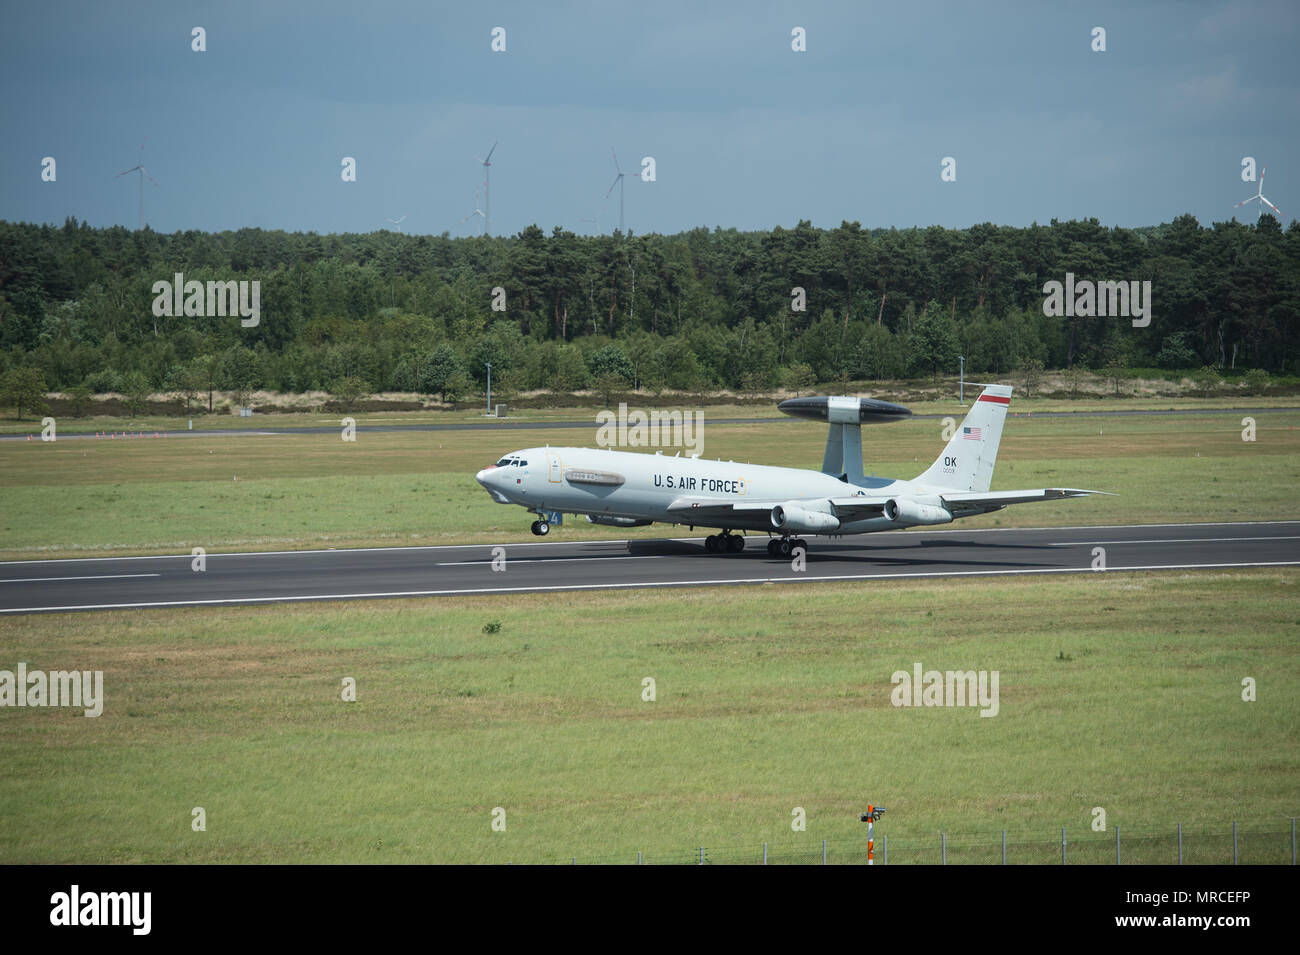 A U.S Air Force E-3 Sentry takes off June 7, 2017, at NATO Air Base Geilenkirchen, Germany in support of BALTOPS 2017. The aircraft and nearly 100 reservists from the 513th Air Control Group are deployed in support of the exercise, which is the first time a U.S. E-3 Sentry has supported a NATO exercise in 20 years. (U.S. Air Force photo/2nd Lt. Caleb Wanzer) Stock Photo